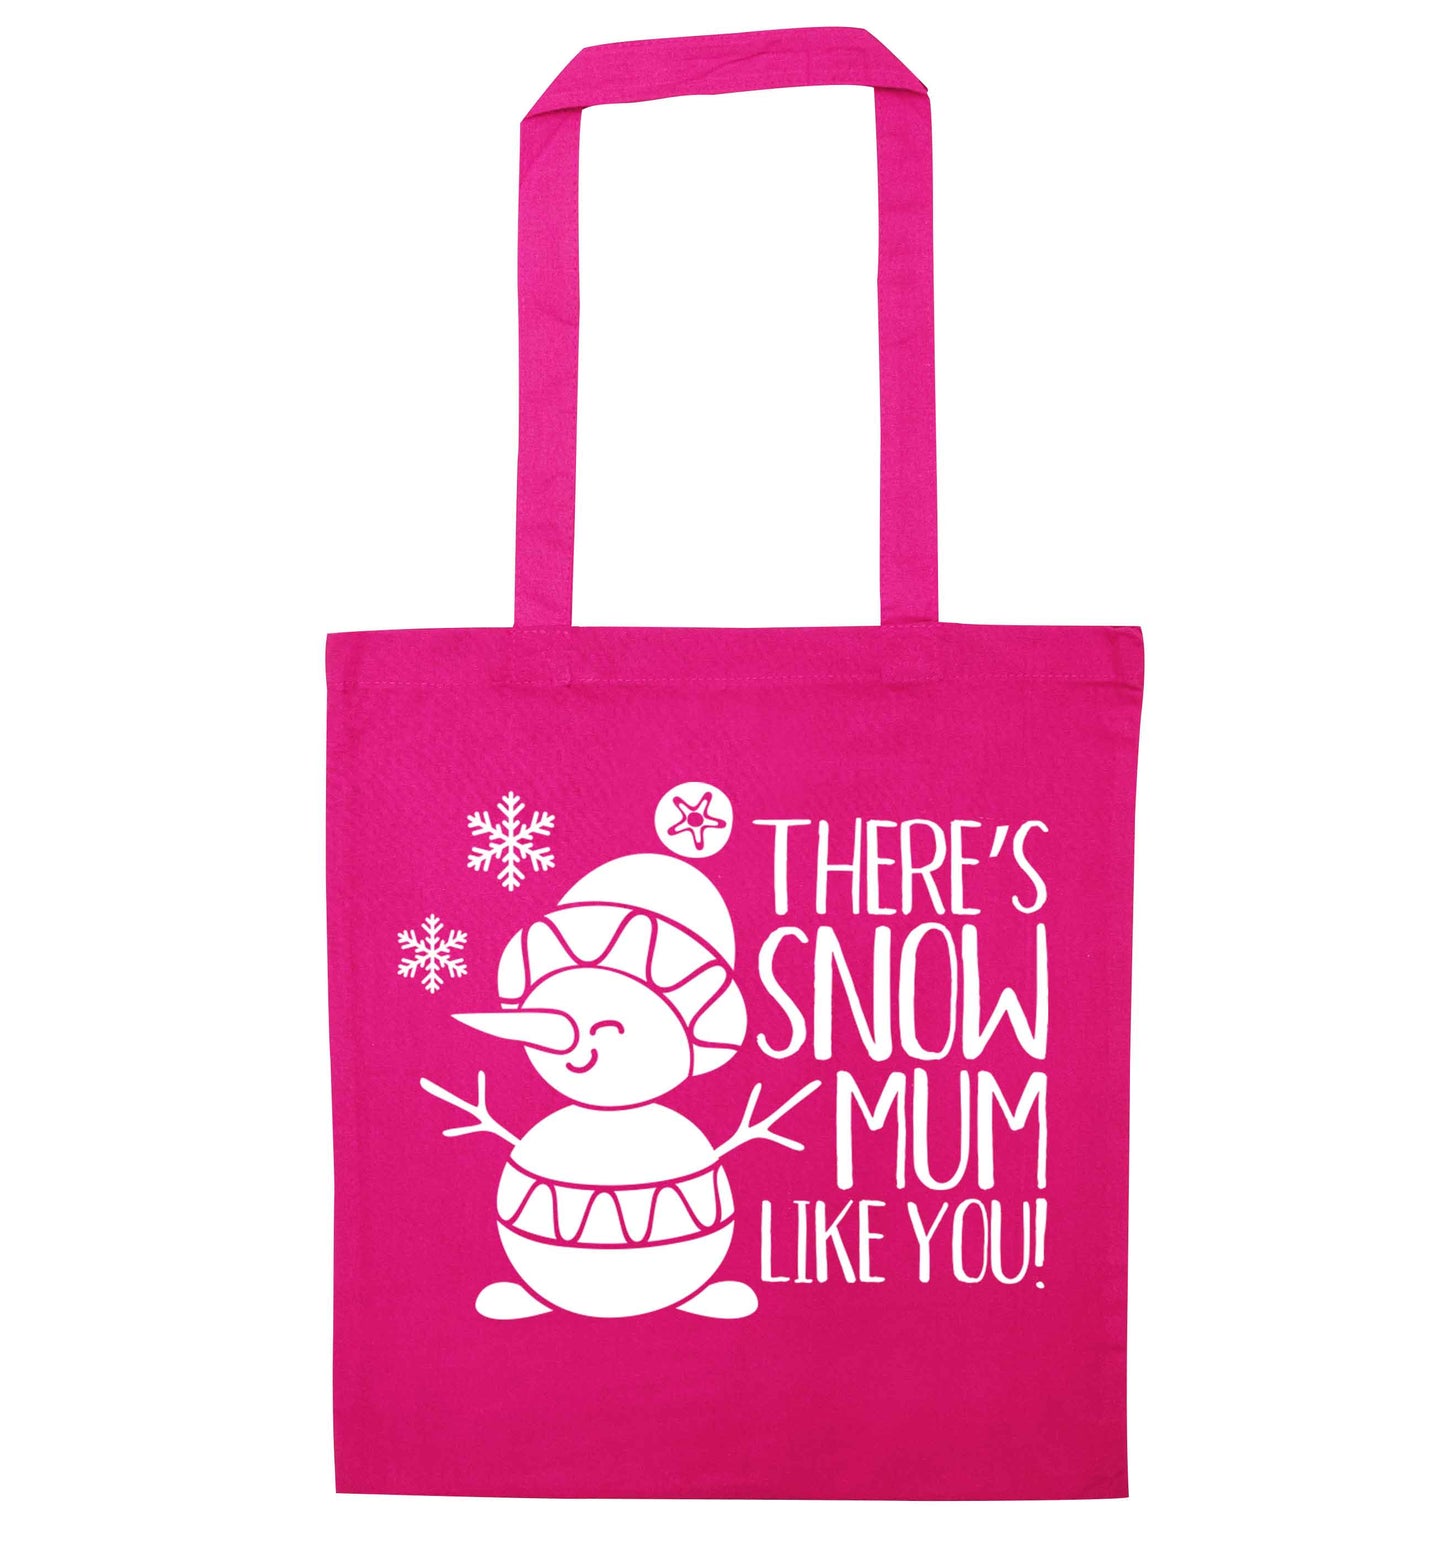 There's snow mum like you pink tote bag